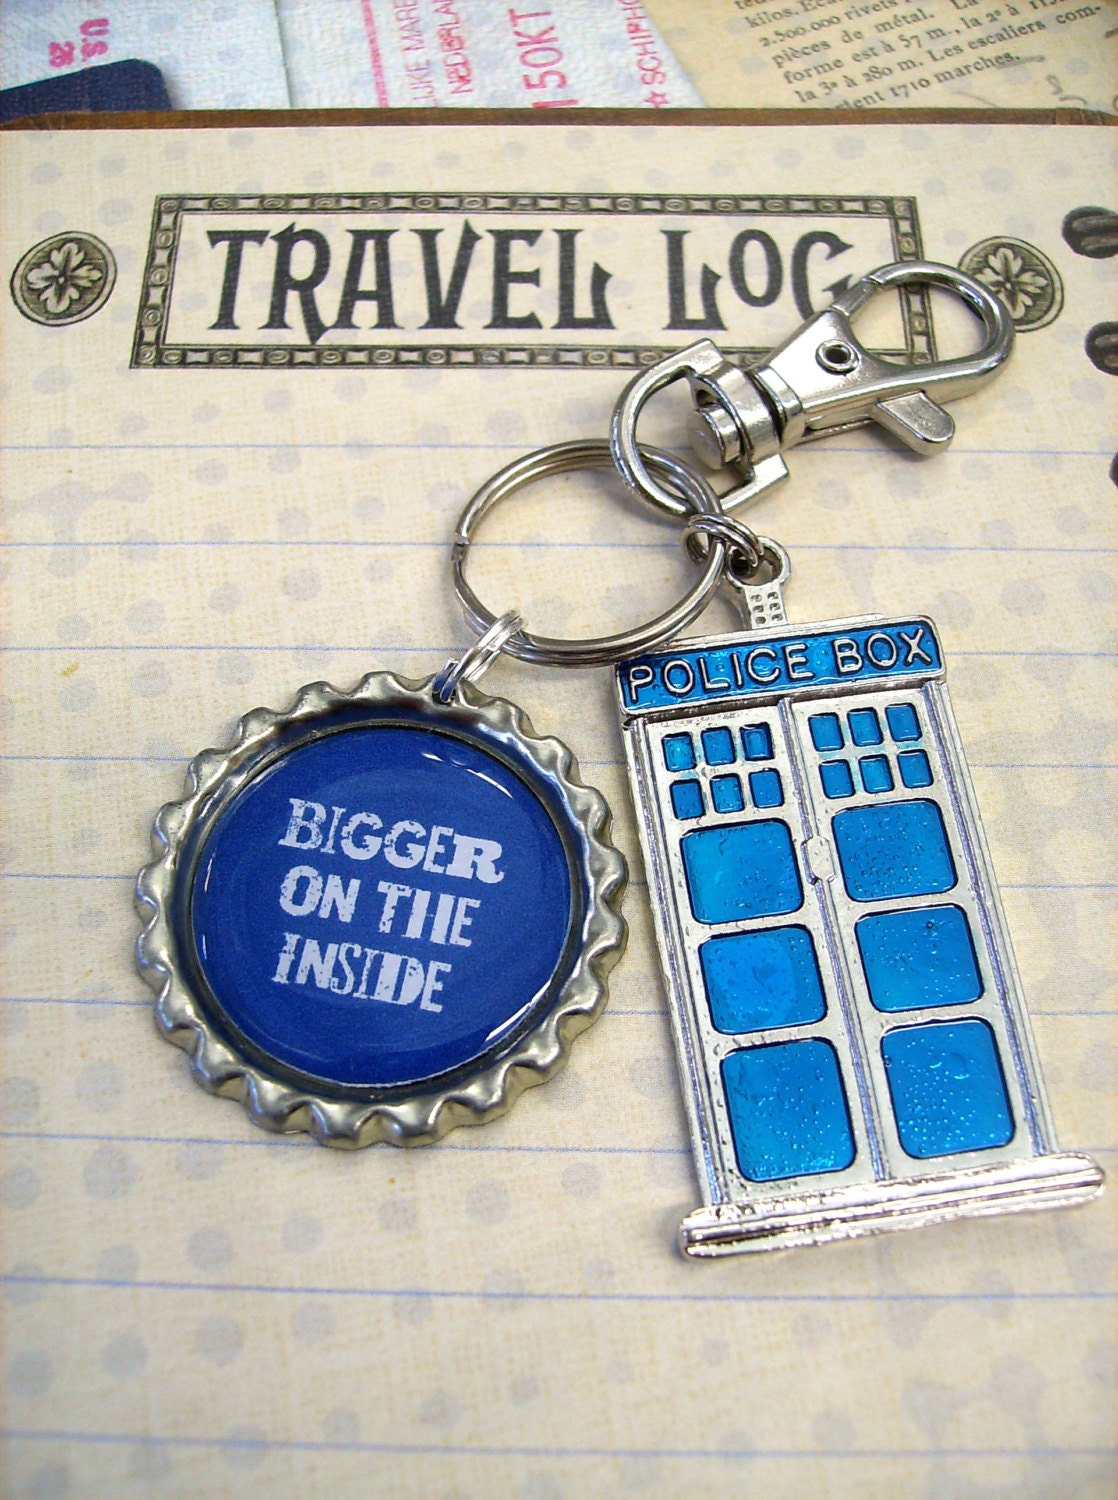 Bigger on the Inside, Blue Police Box Key Chain, Whovian Key Ring or Backpack Clip - GenXNostalgia